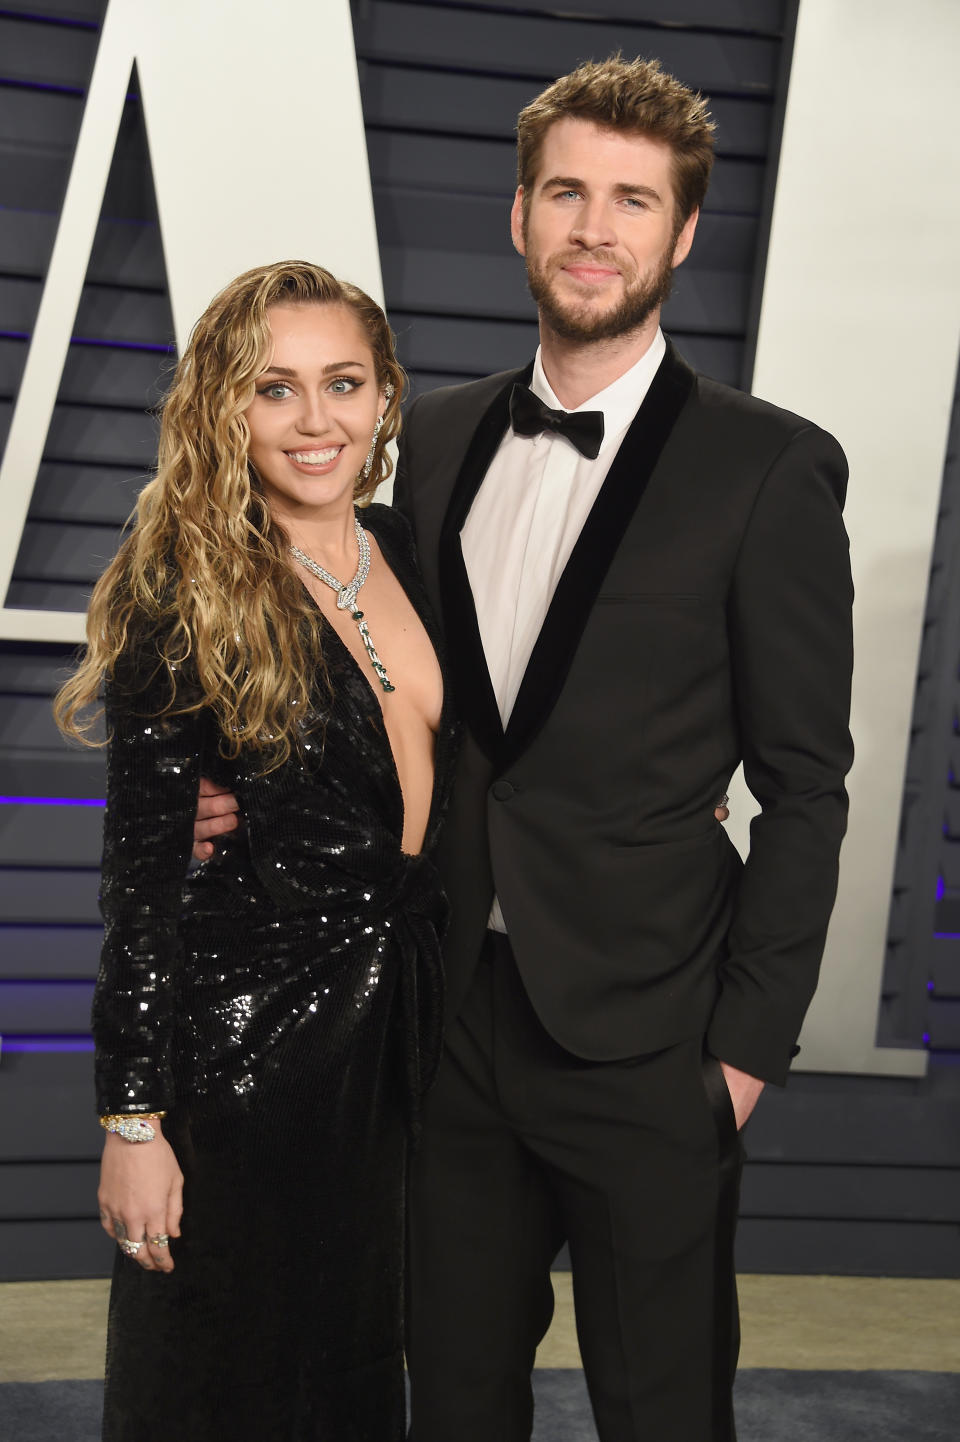 Miley Cyrus and Liam Hemsworth at the Vanity Fair Oscars 2019 after party